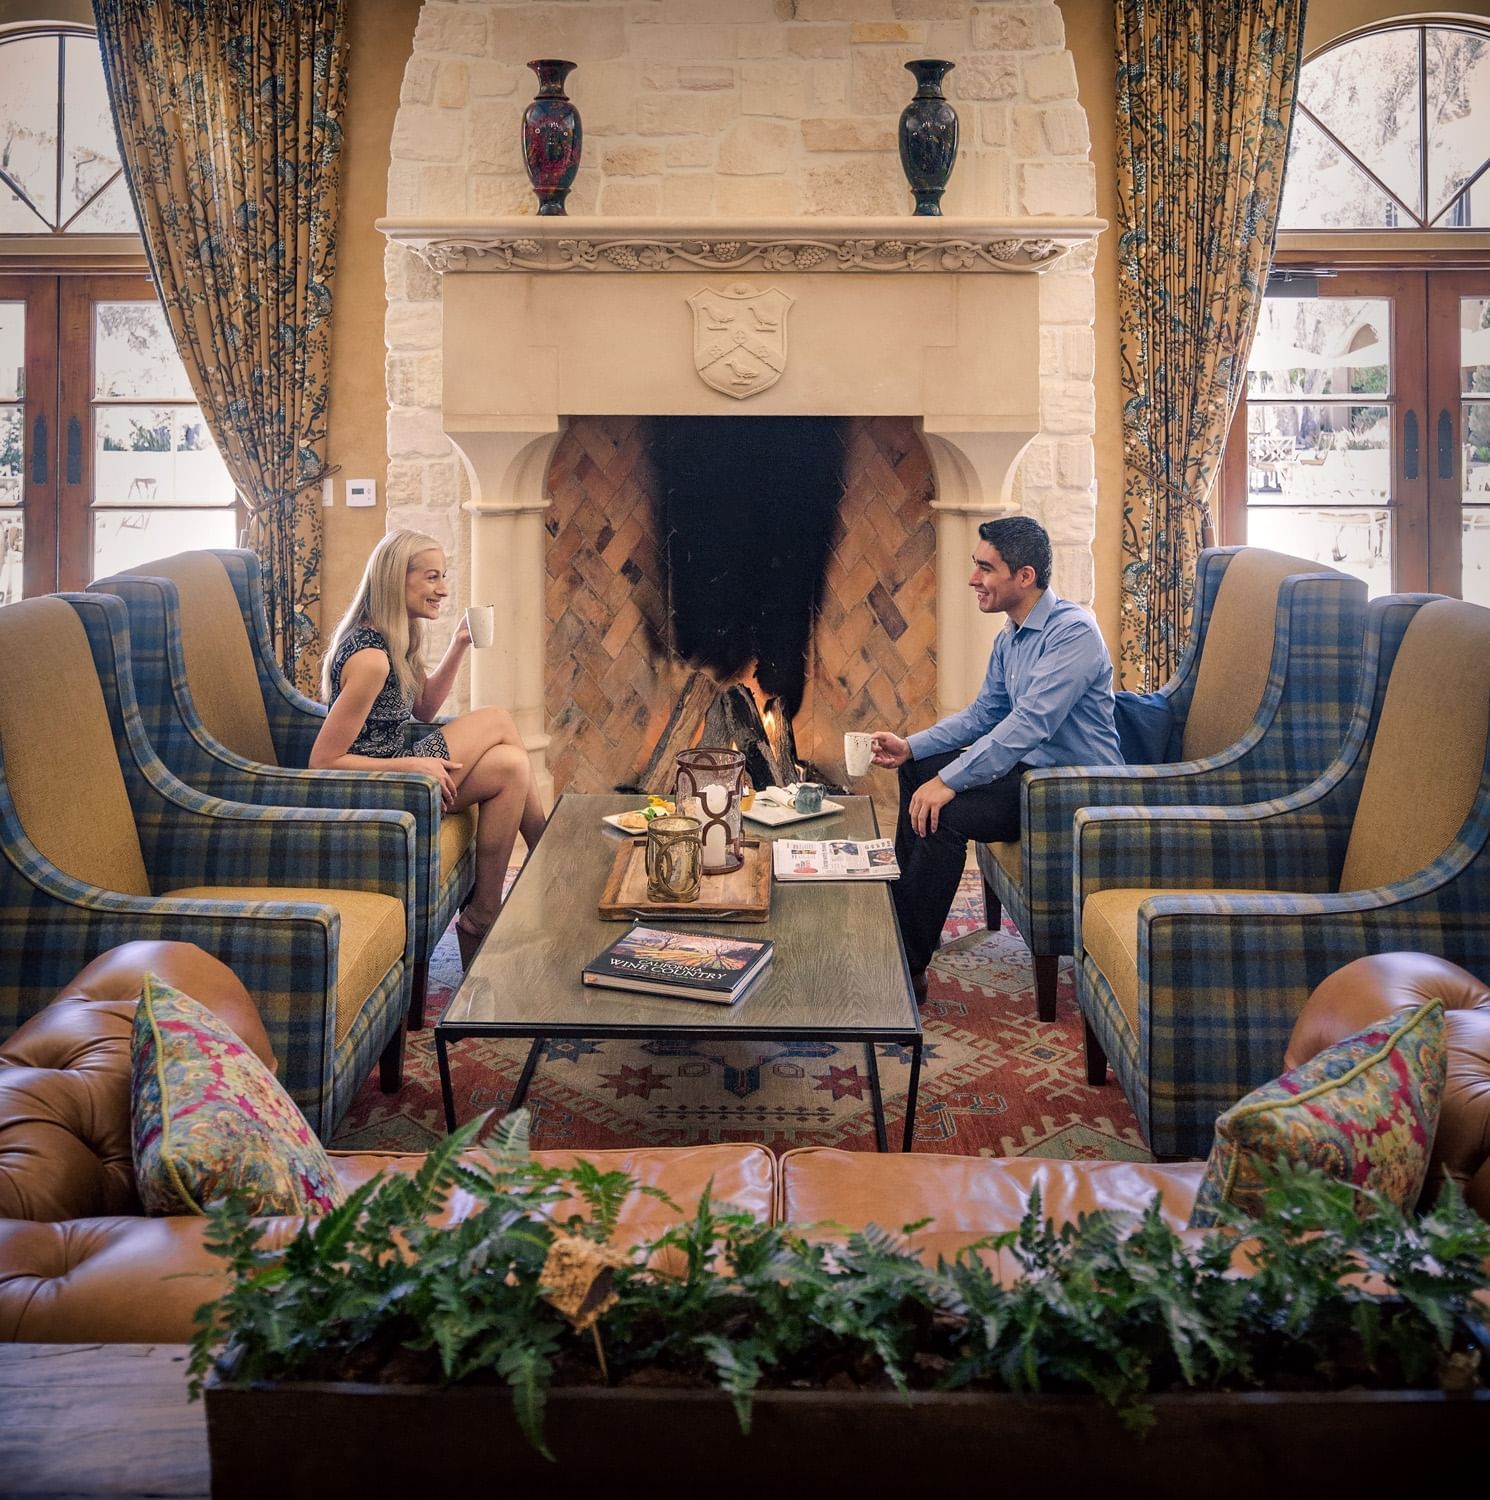 Guests sitting in lounge chairs in front of fire place